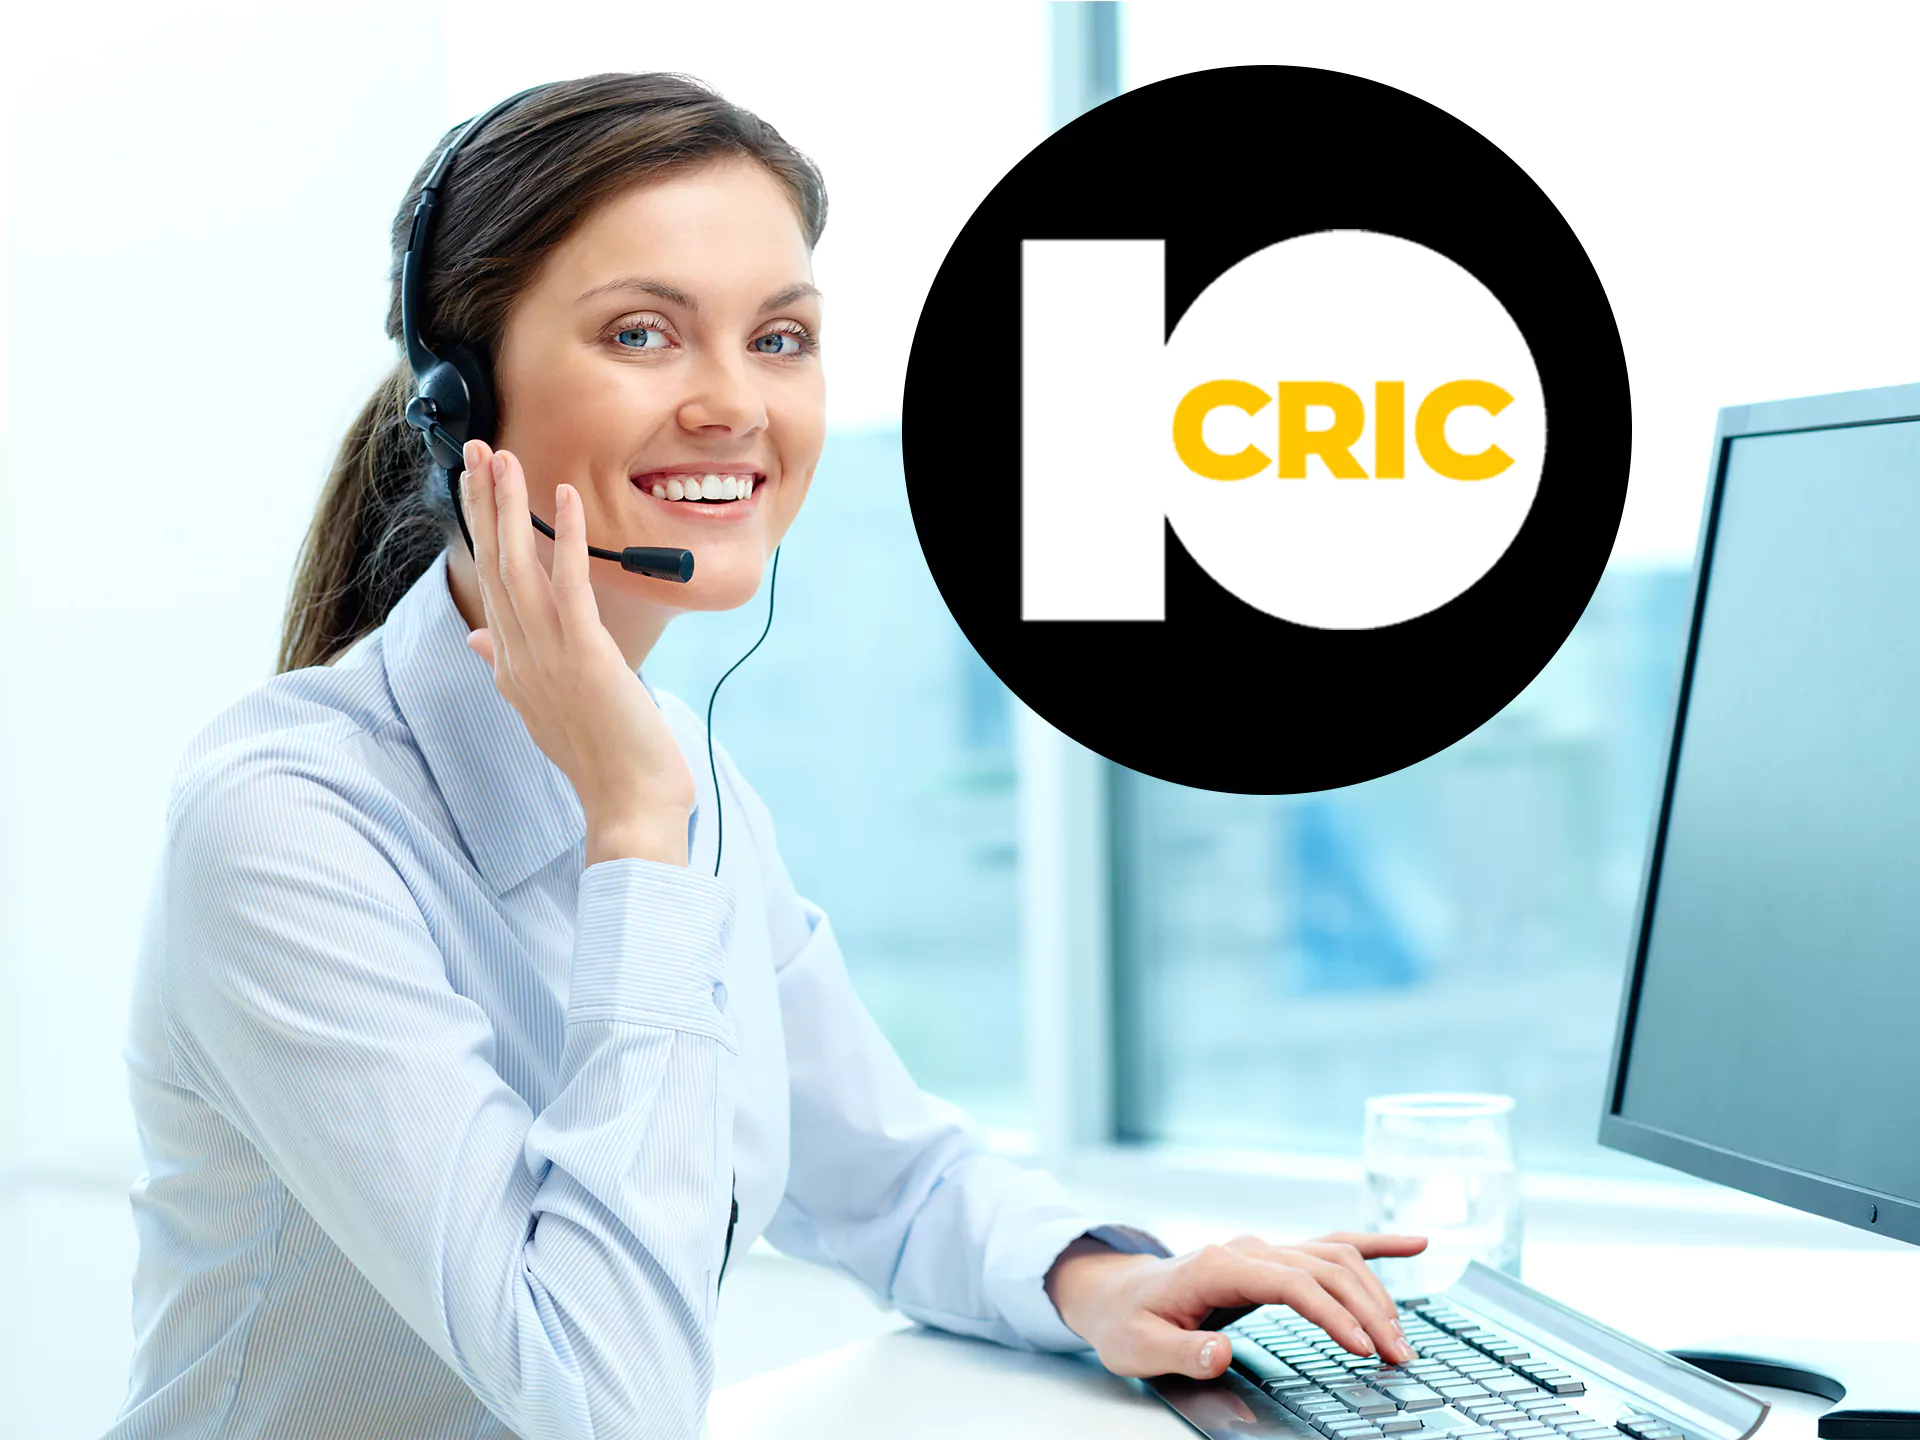 You can contact 10cric support in chat on the main page.